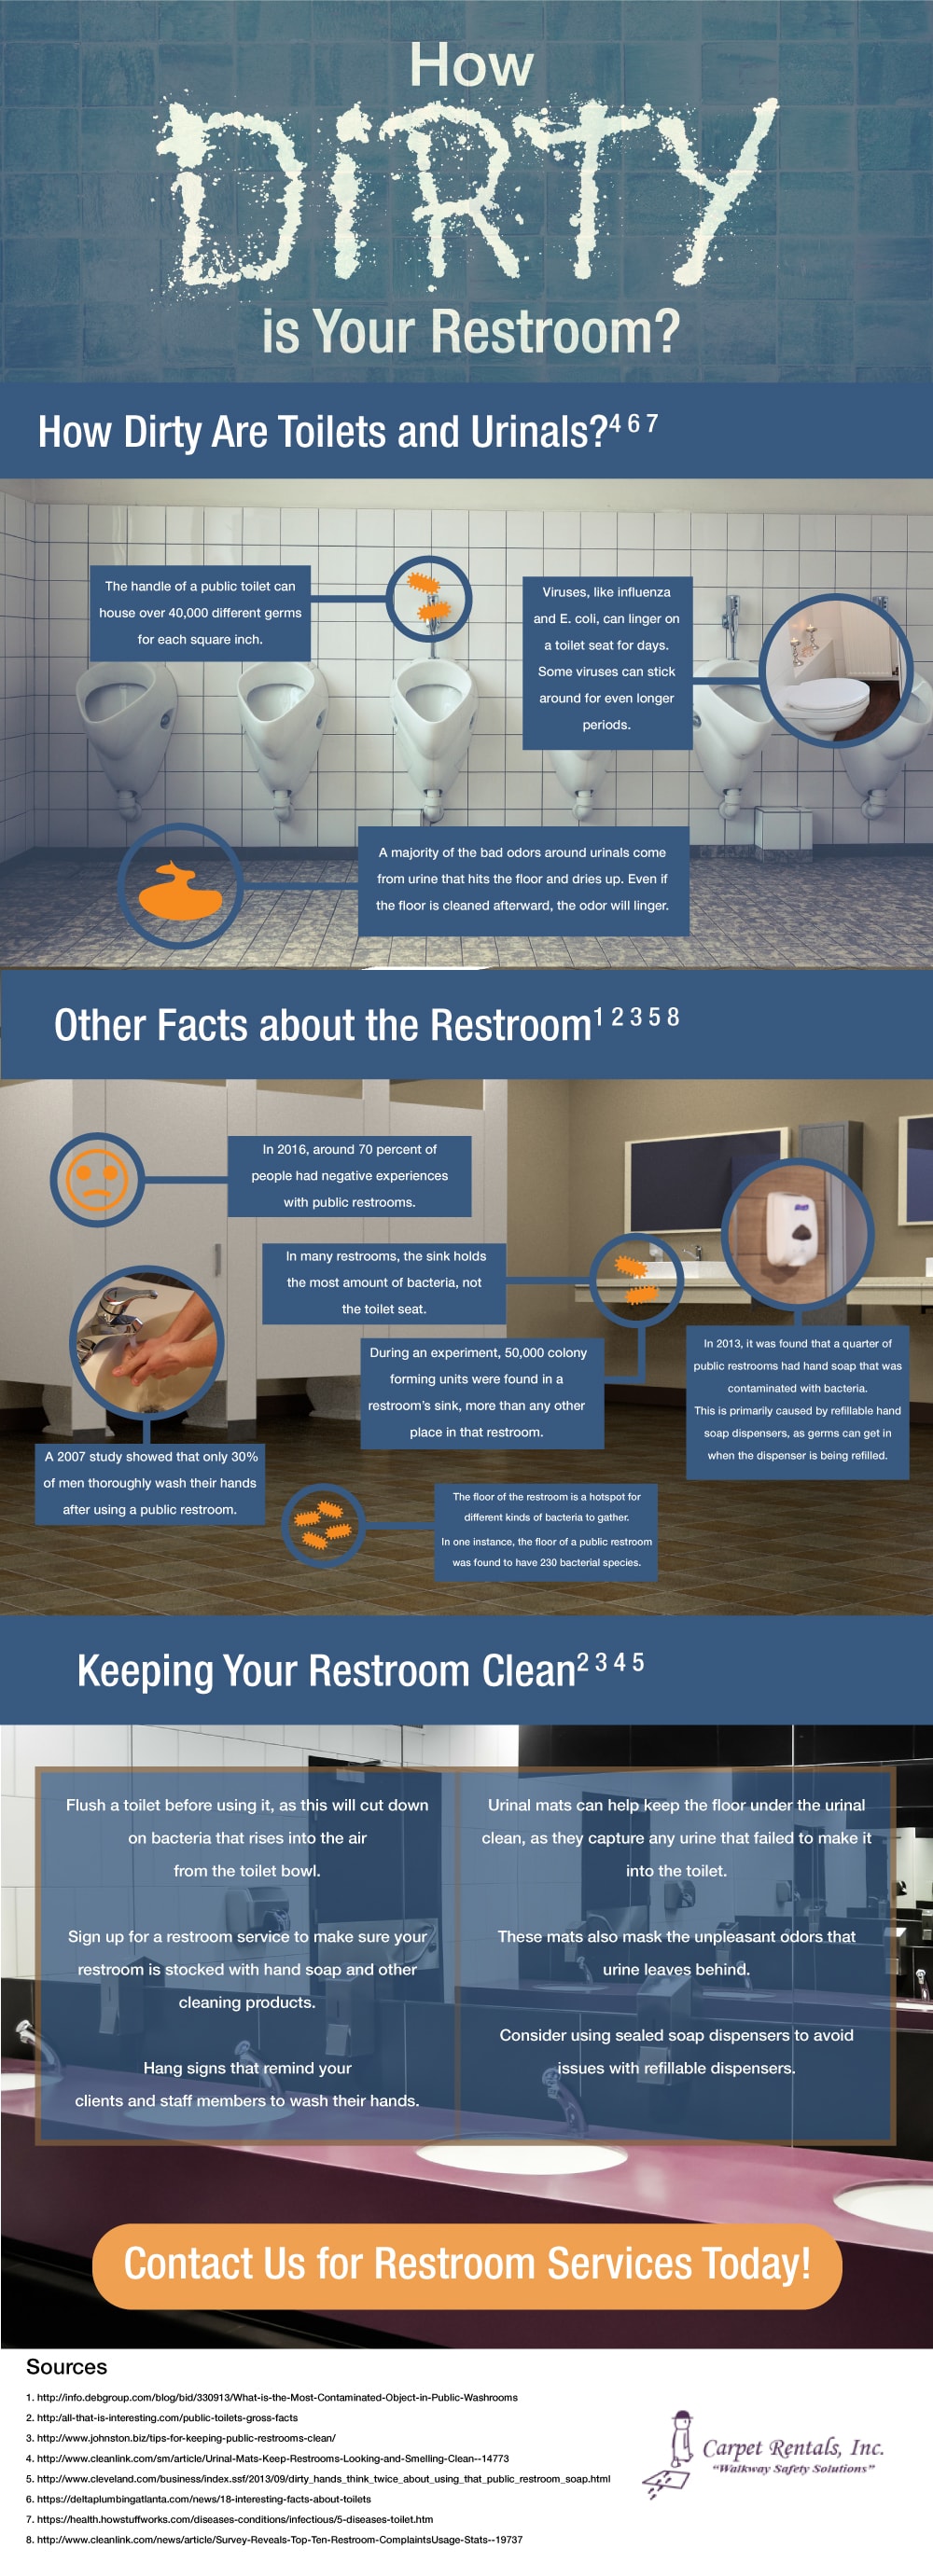 How Dirty is Your Restroom?